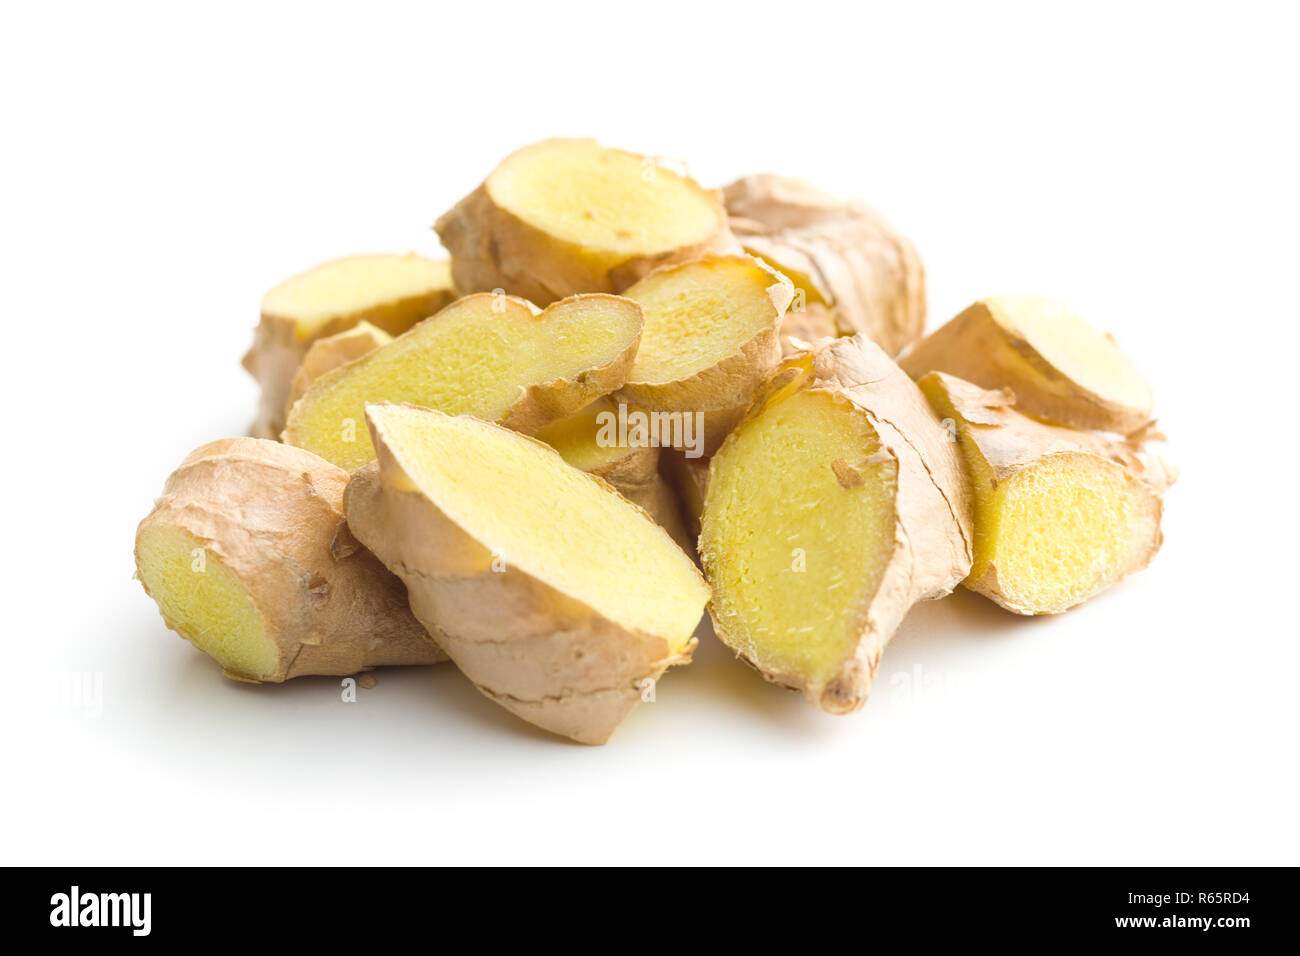 Sliced Ginger Root Stock Photo Alamy